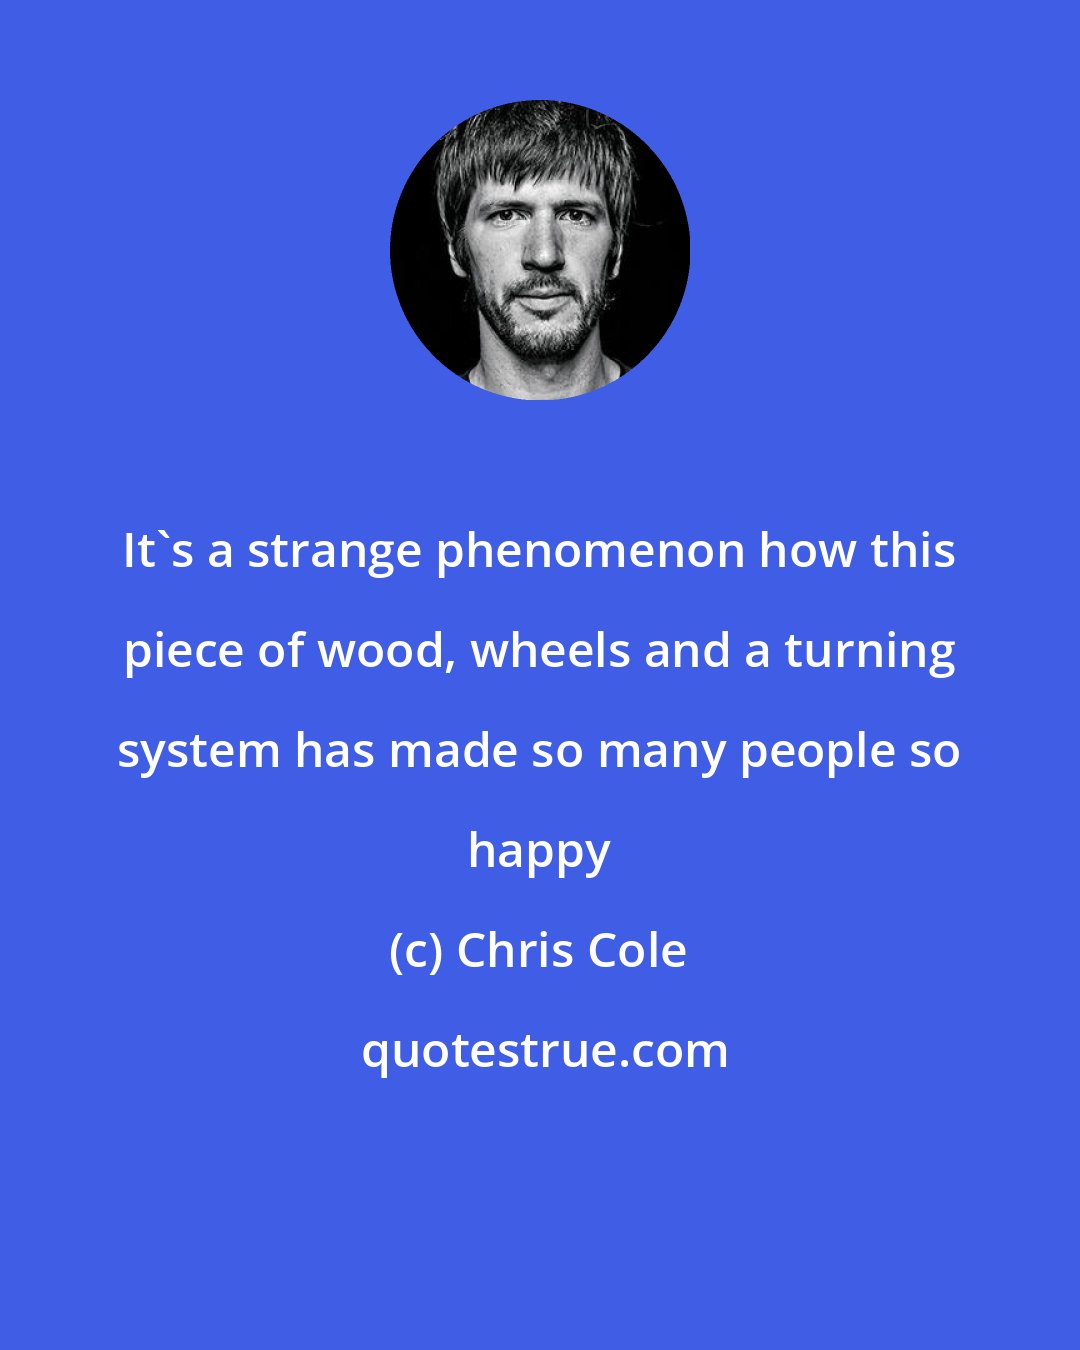 Chris Cole: It's a strange phenomenon how this piece of wood, wheels and a turning system has made so many people so happy